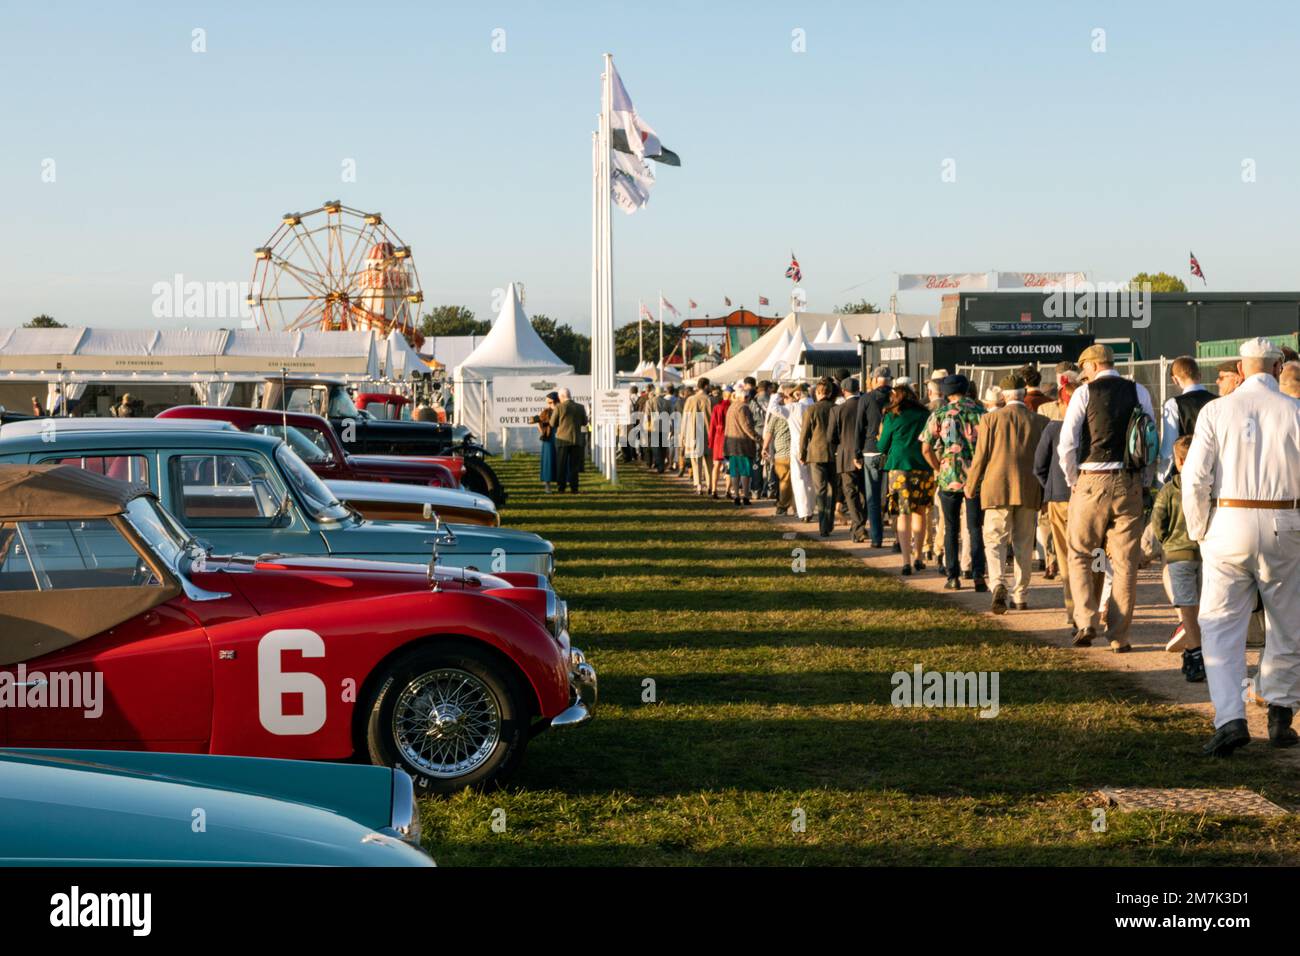 GOODWOOD, SUSSEX, UK - SEPTEMBER 14, 2019:  People queueing to enter the Goodwood Revival motor enthusiast event Stock Photo